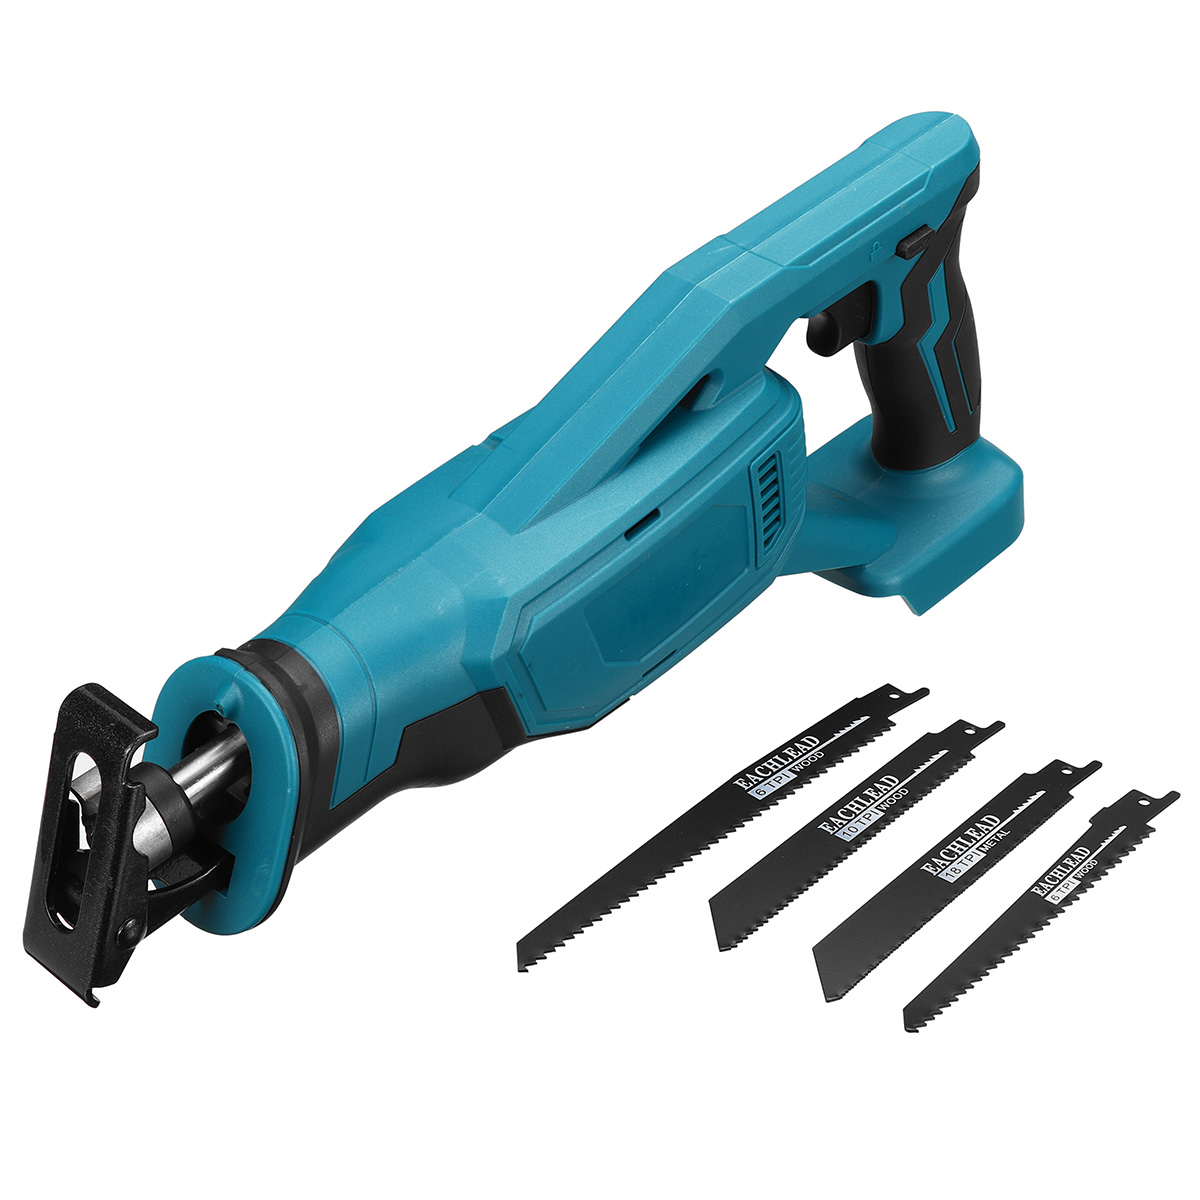 18V-Blue-Electric-Reciprocating-Saw-Variable-Speed-Cordless-Wood-Metal-Cutting-Power-Tools-Set-1716396-4